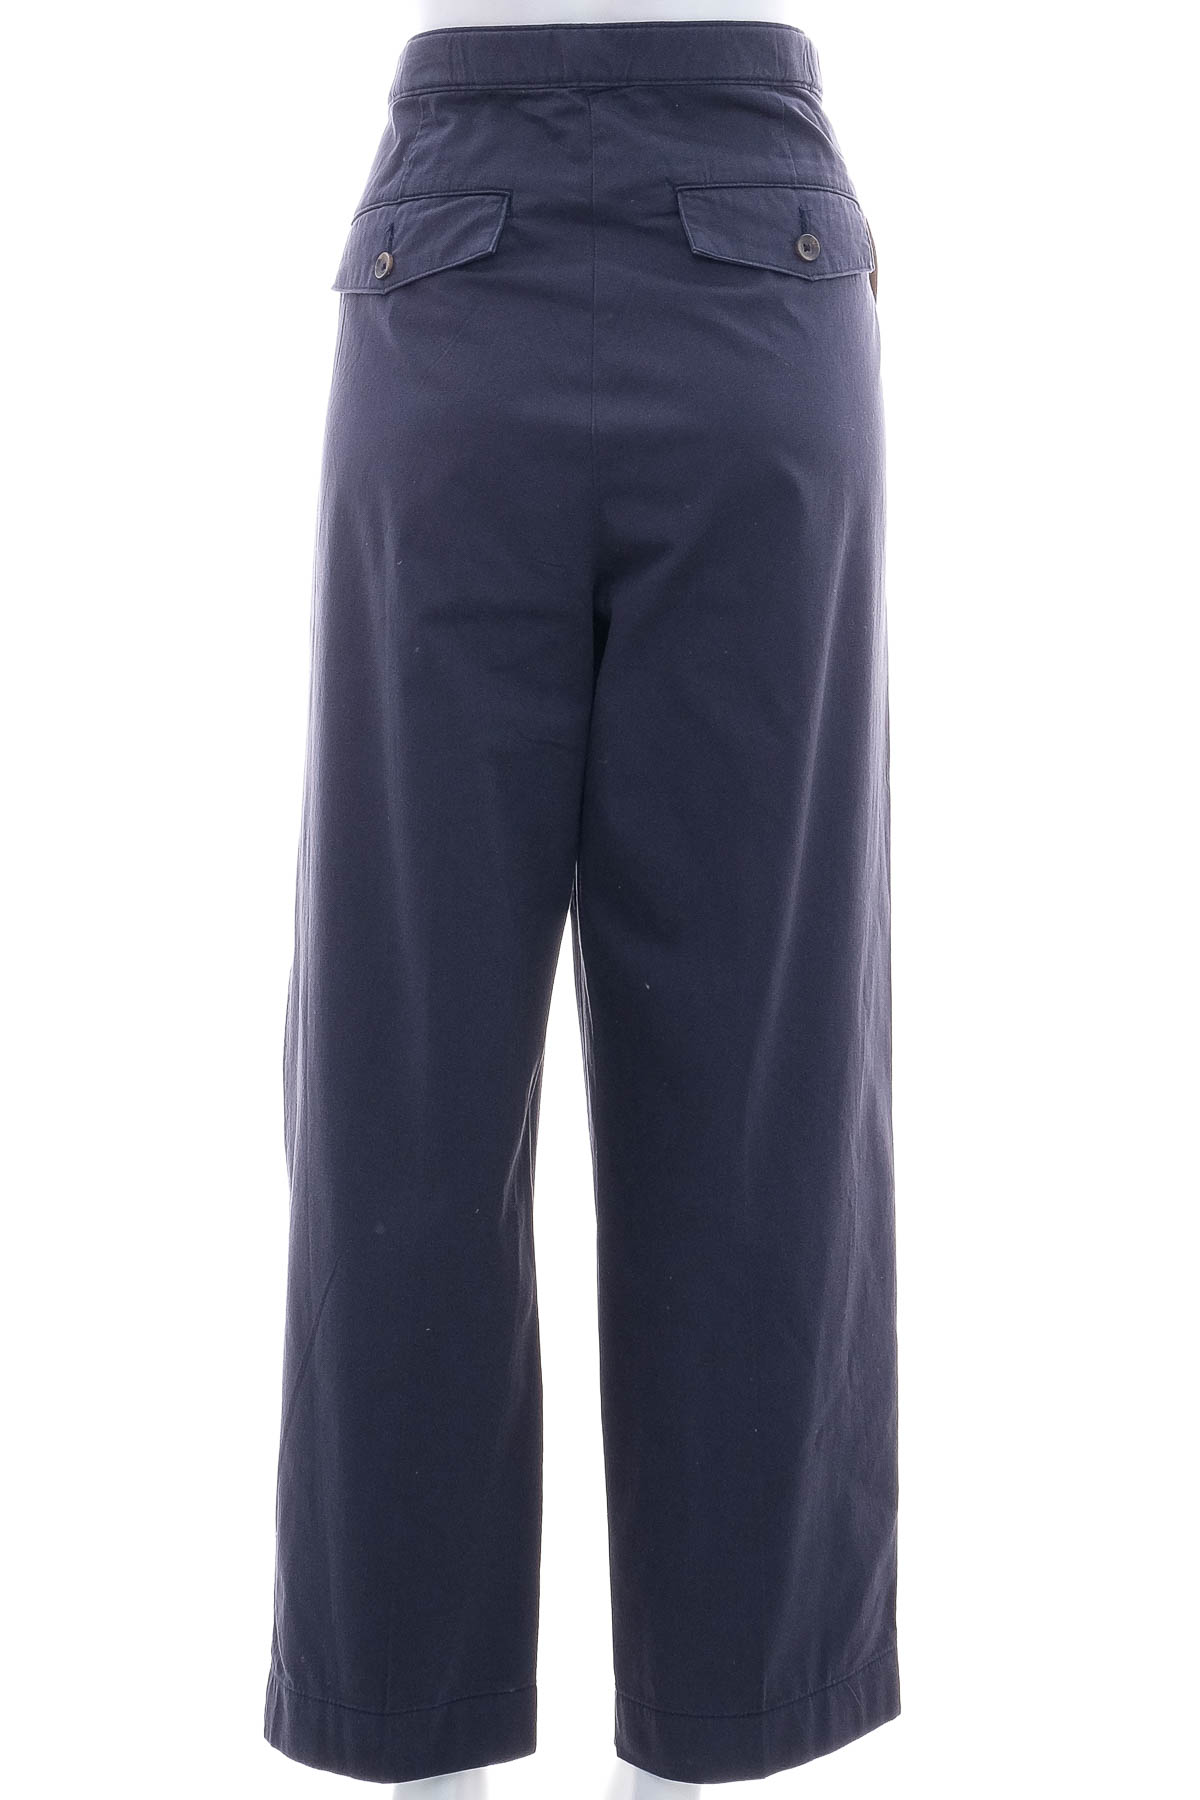 Women's trousers - WOMEN essentials by Tchibo - 1